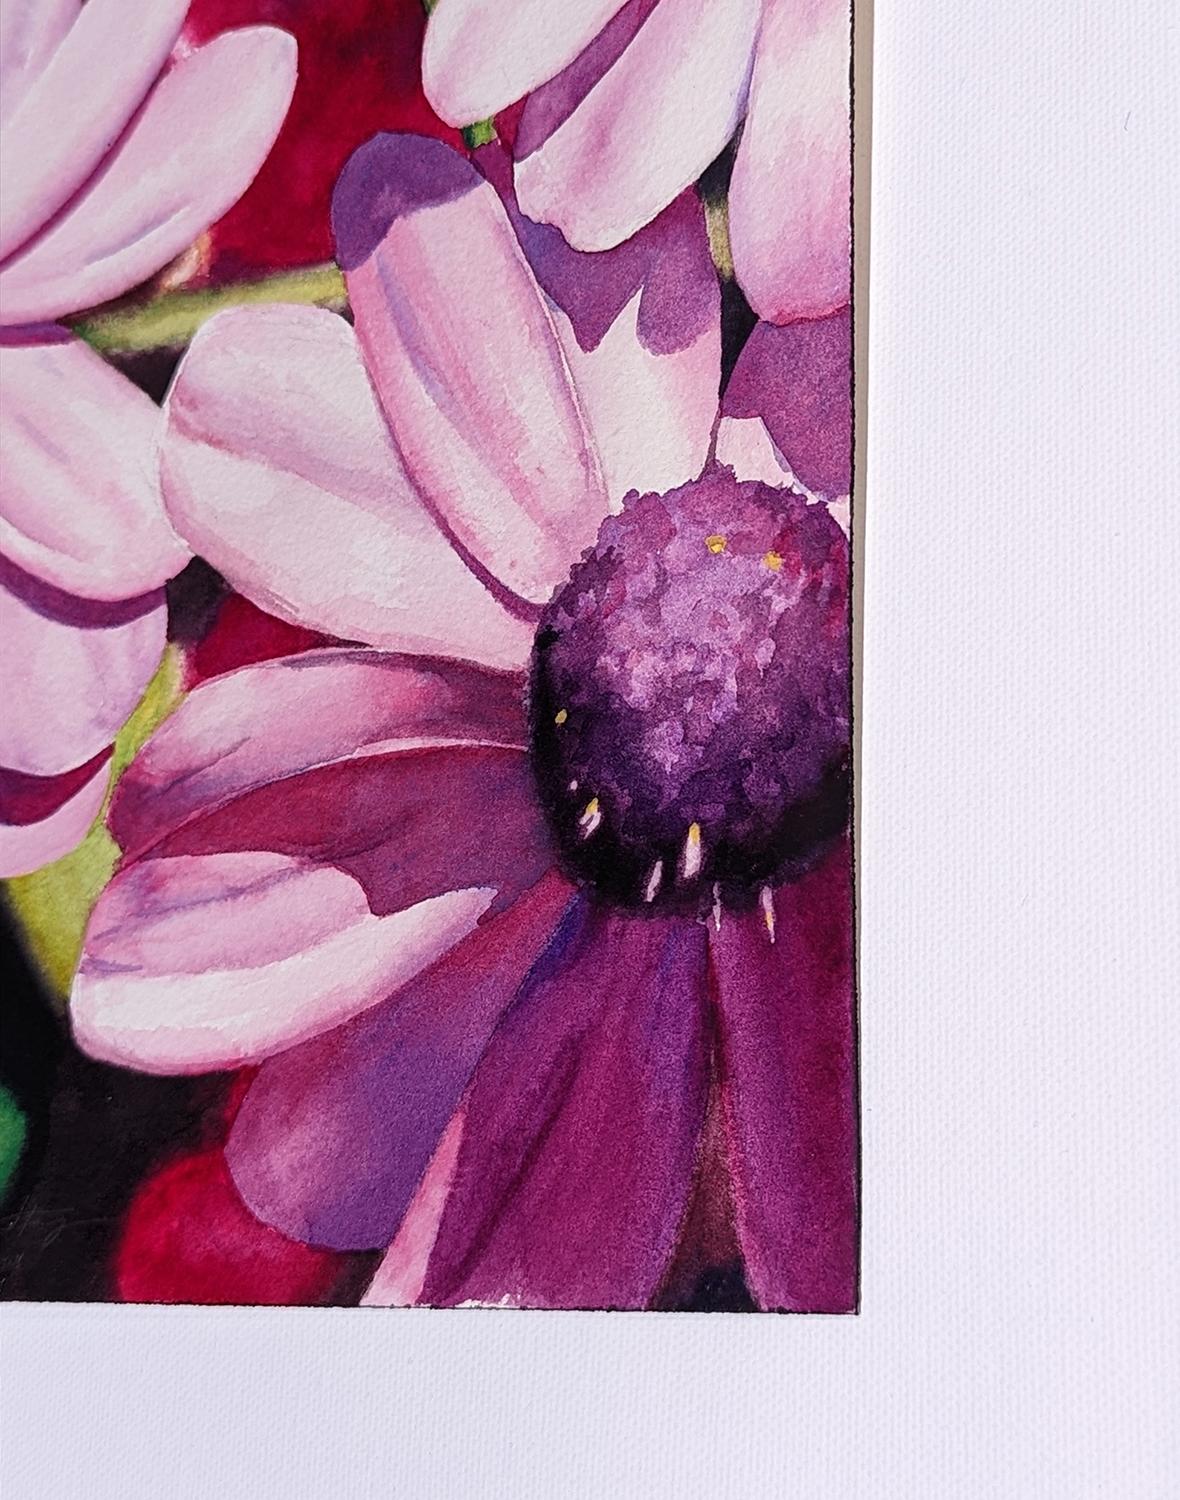 Mini Daisies in Many Pinks, Original Painting - Art by Jinny Tomozy